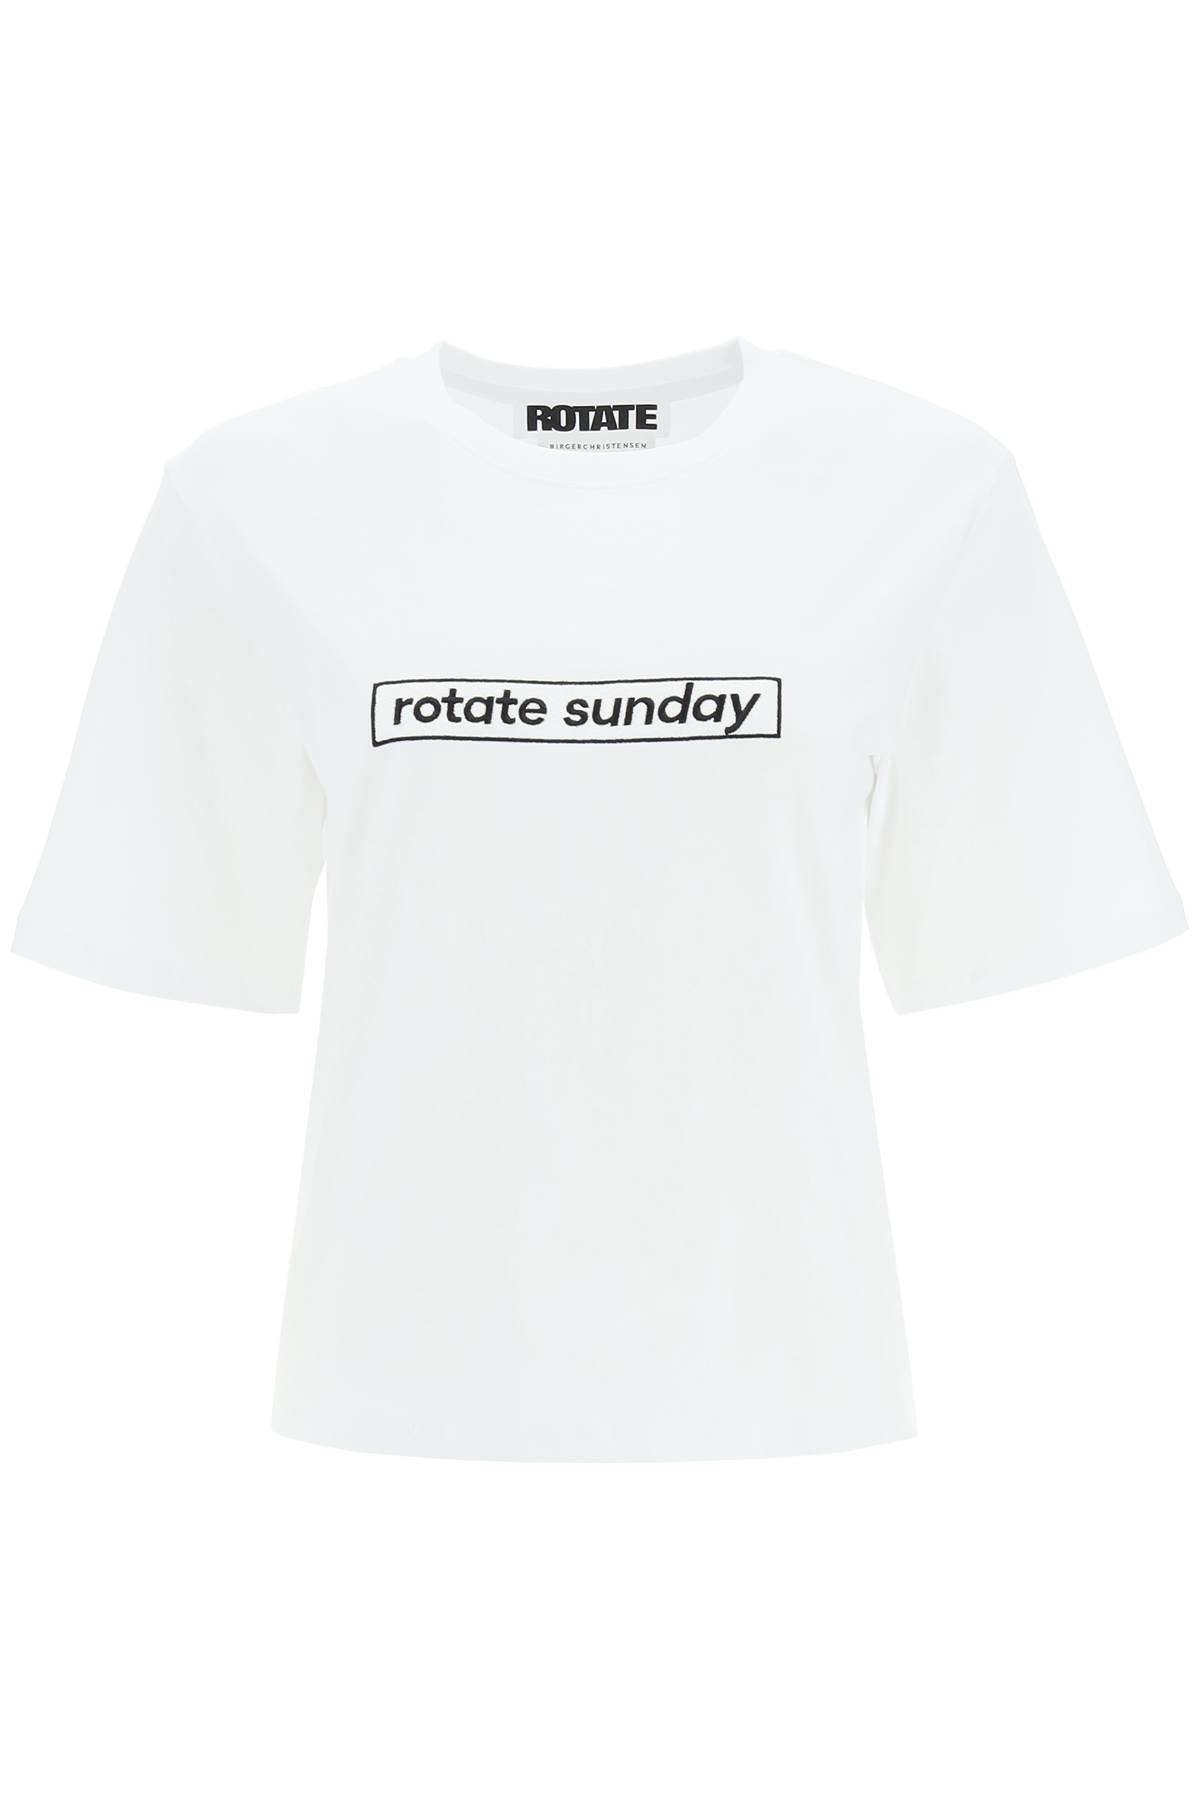 ROTATE ASTER T-SHIRT WITH ROTATE SUNDAY PATCH